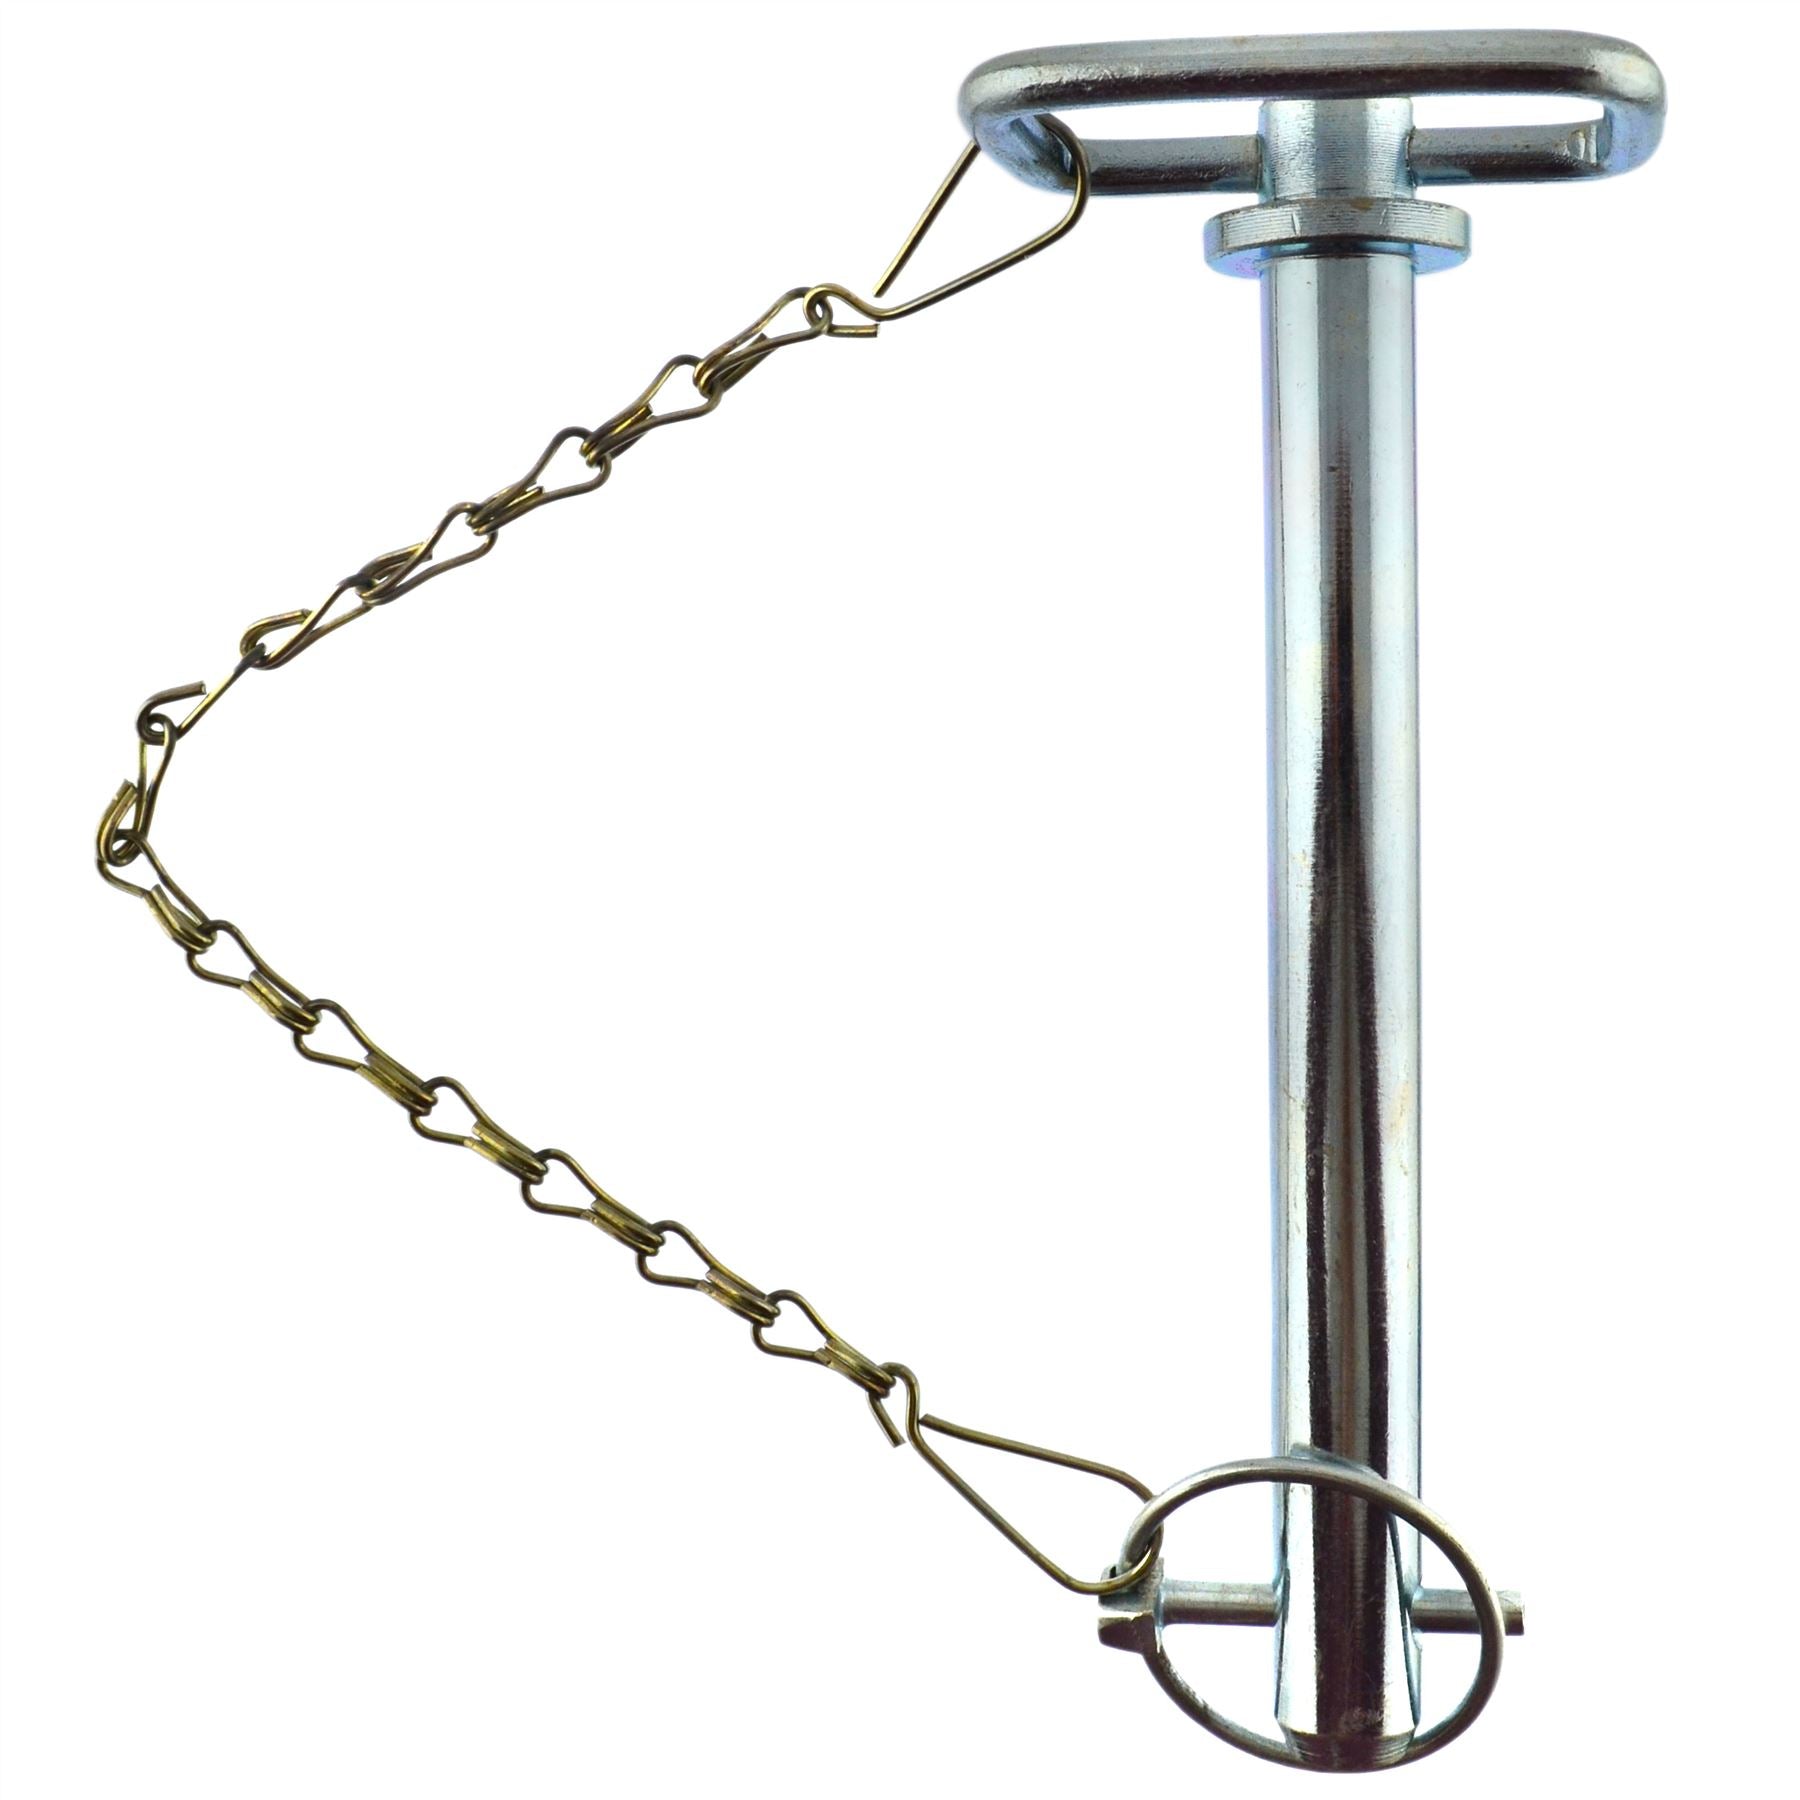 Replacement Hitch Pin for Ball & Pin Couplings Tow Balls